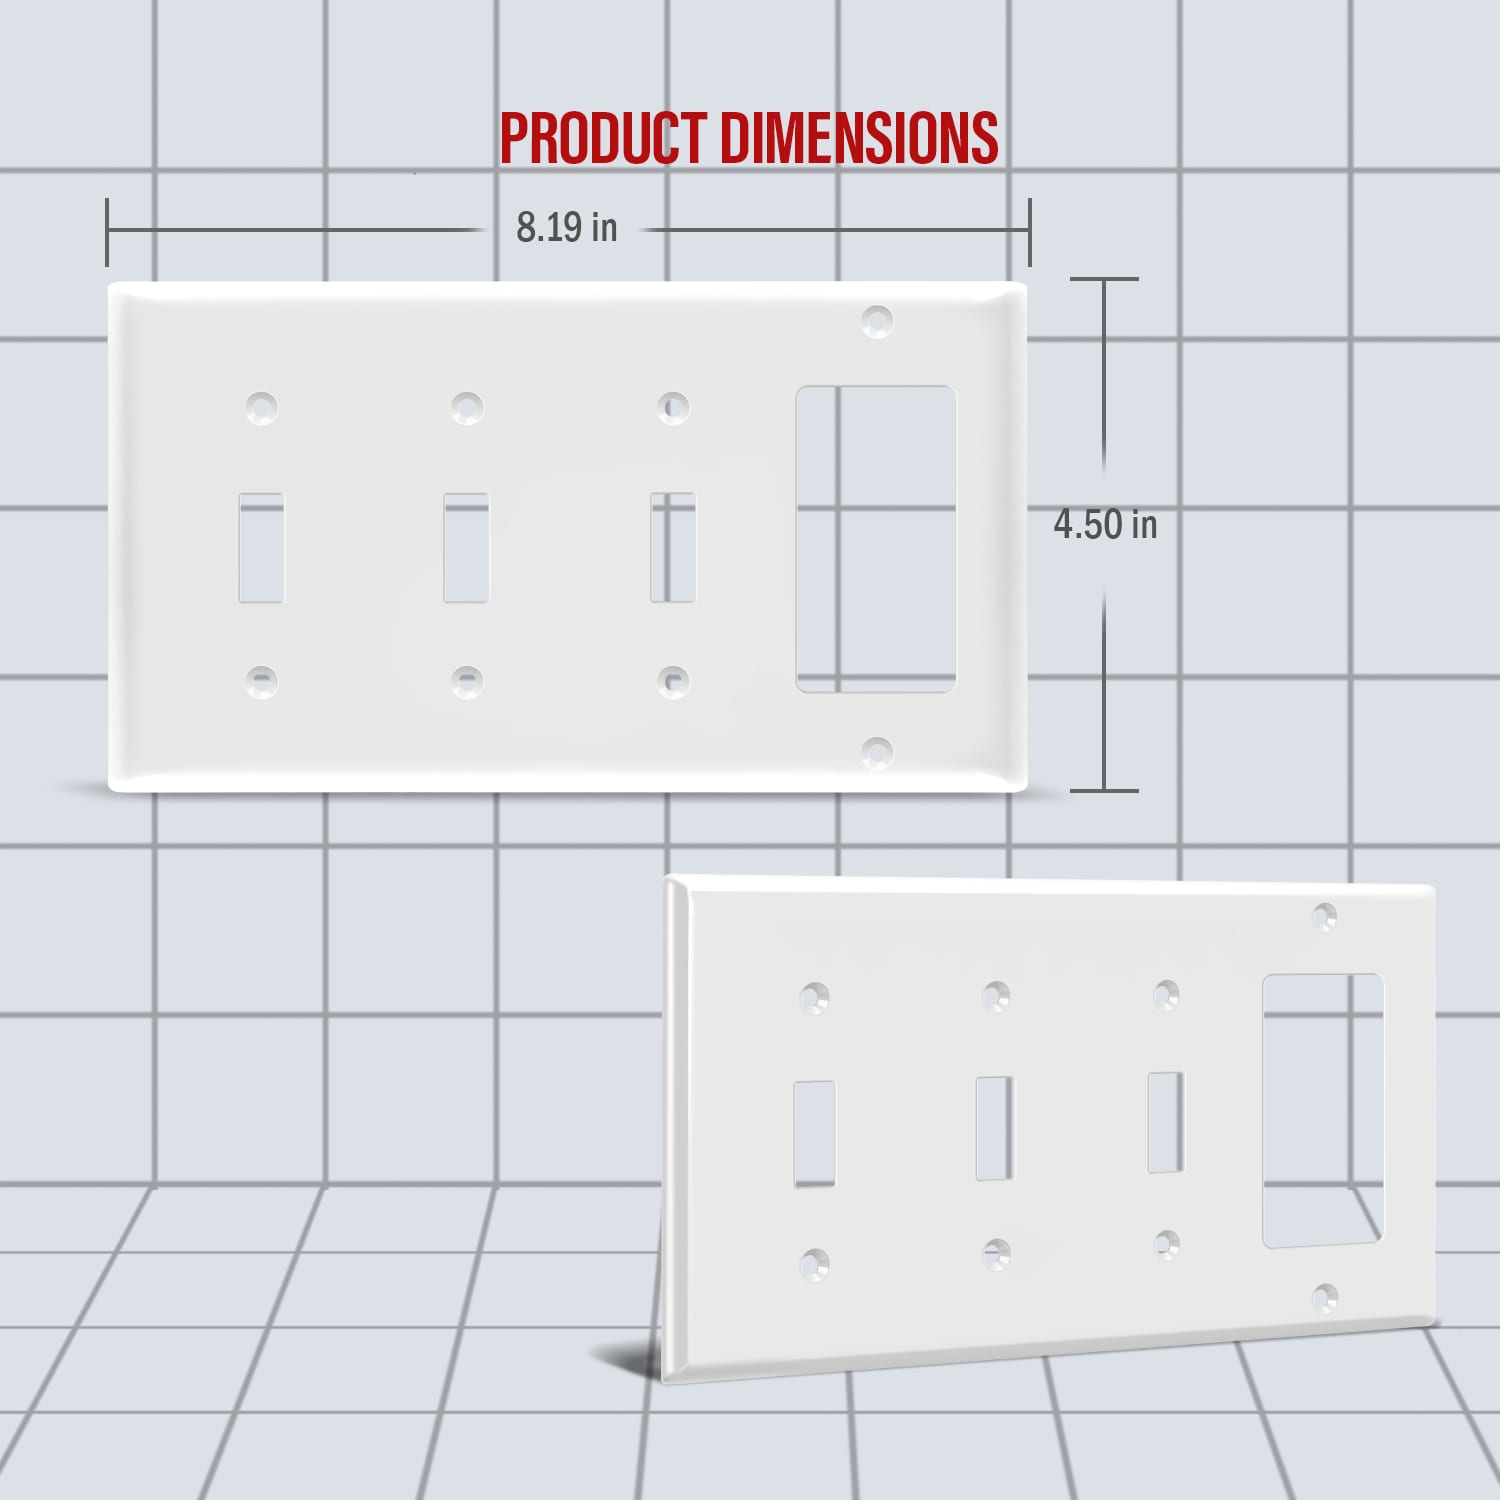 4-Gang Toggle Switch/Decorator Outlet Combination Wall Plate